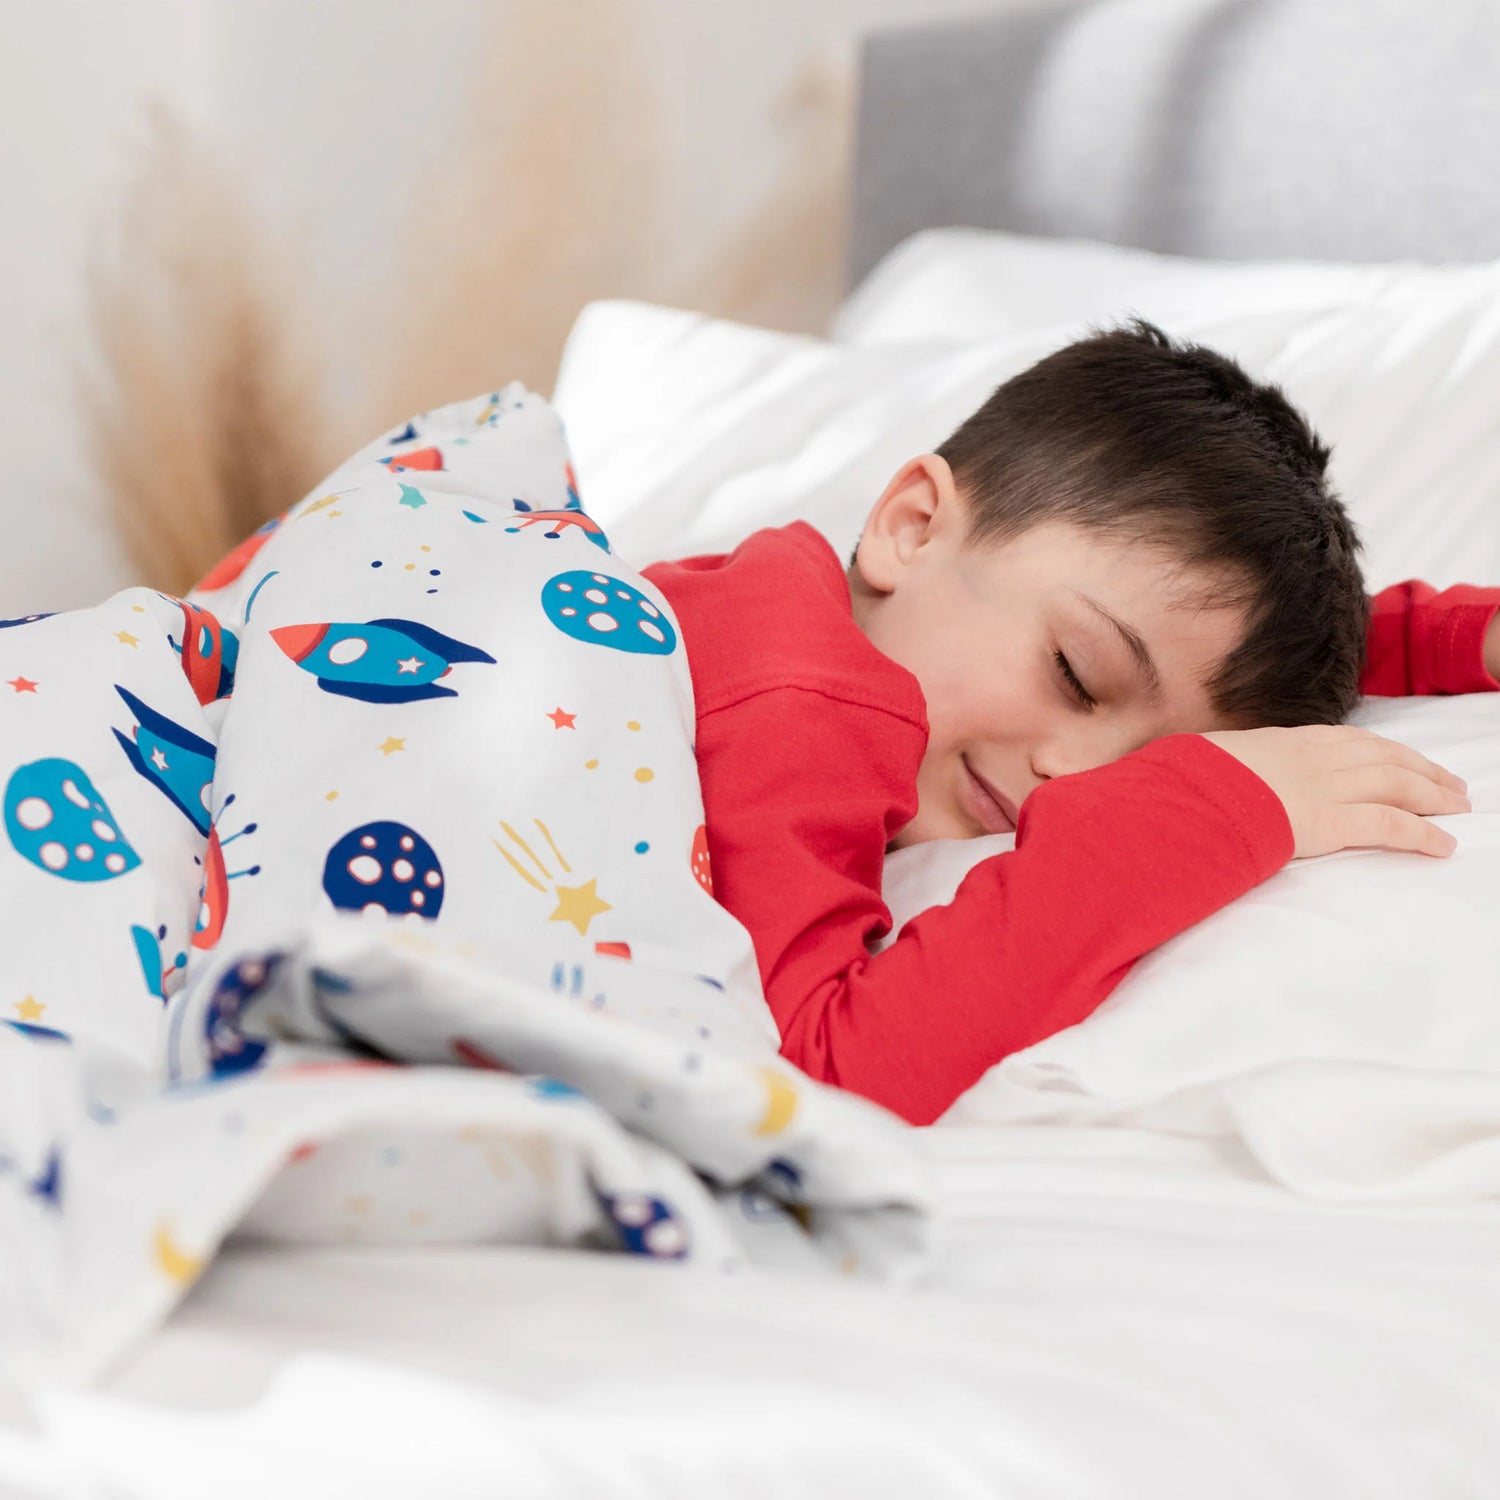 THE IMPORTANCE OF SLEEP FOR CHILDREN